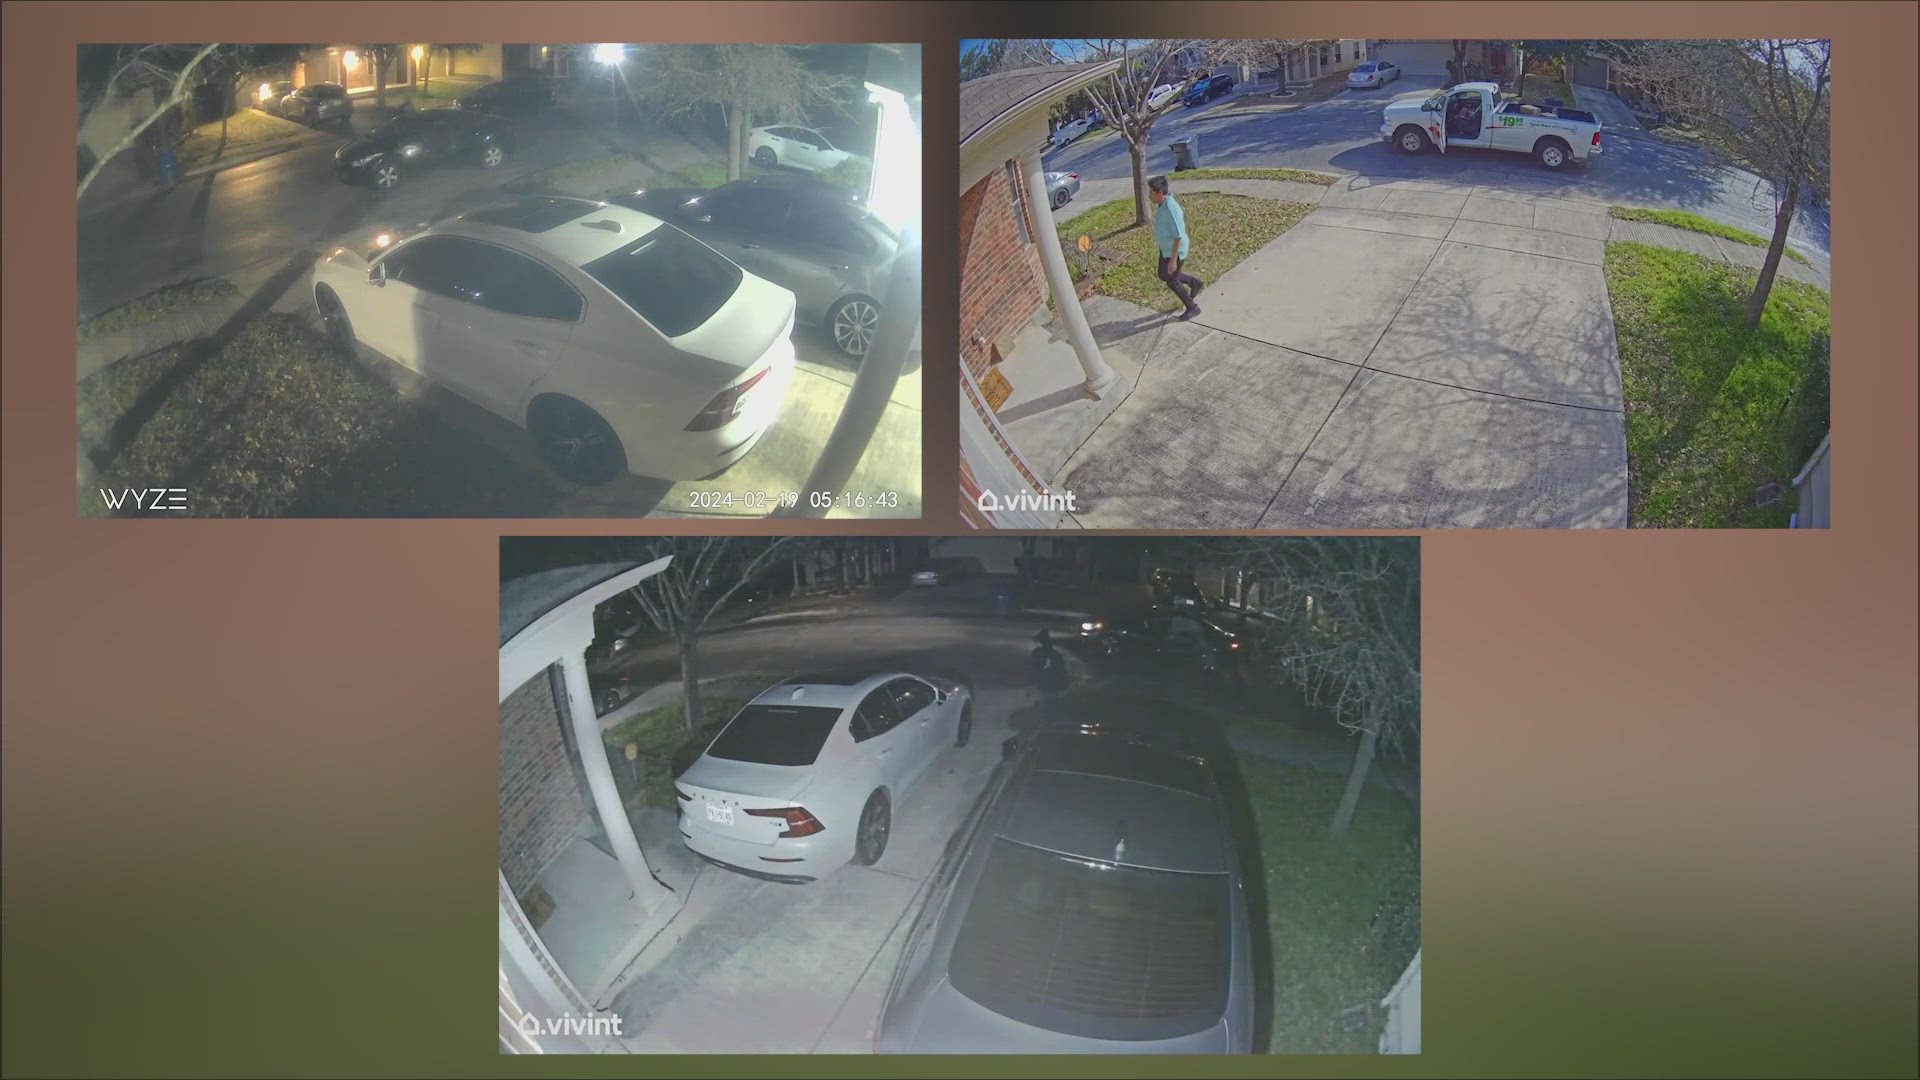 The groups of car burglars were caught on camera. This comes just days after two porch pirates used a U-Haul to steal packages.